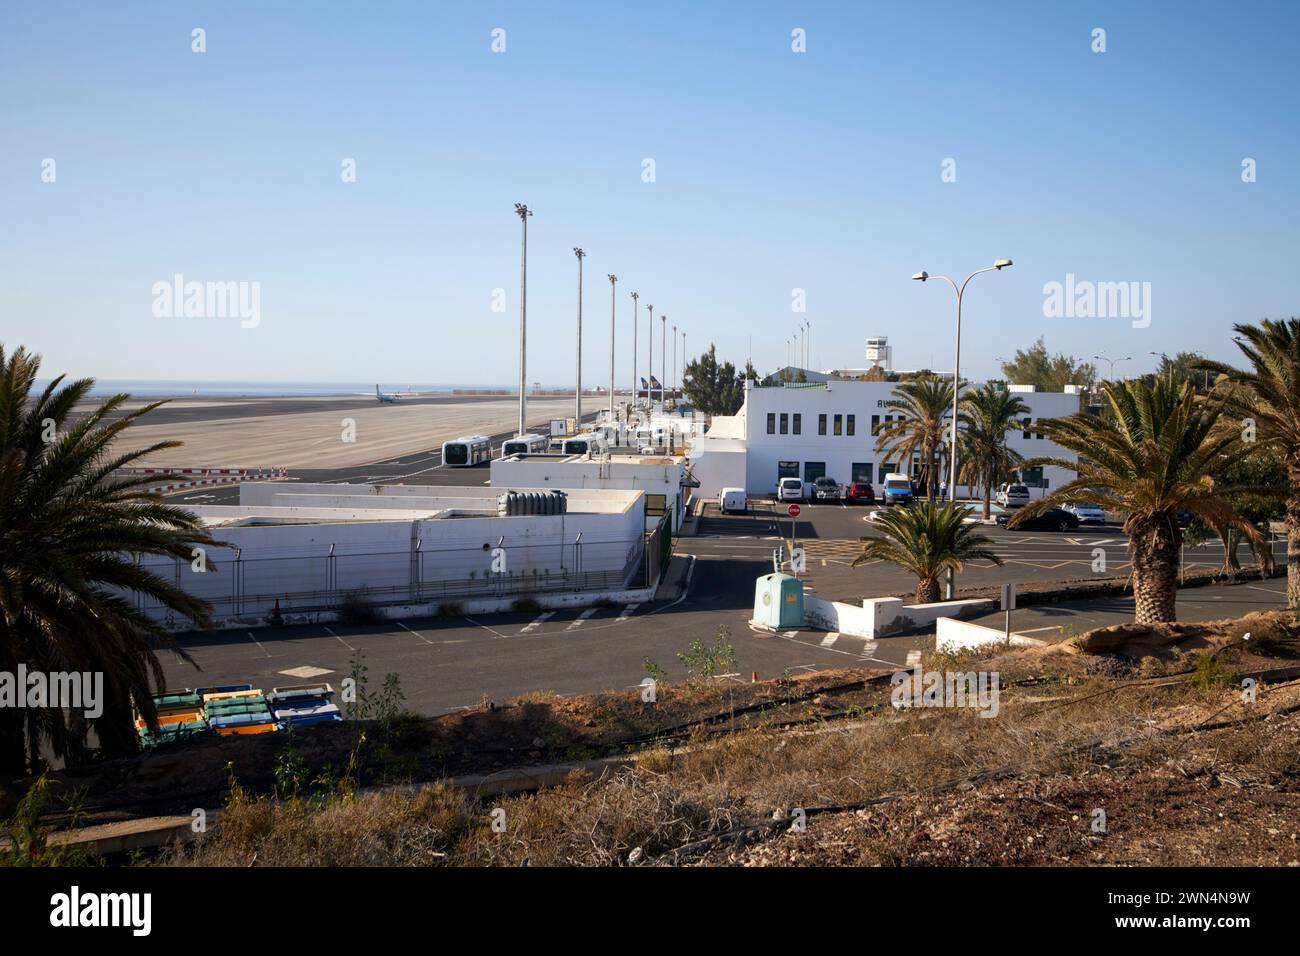 old buildings taxiway and runway of lanzarote airport viewed from Playa Honda, Lanzarote, Canary Islands, spain Stock Photo